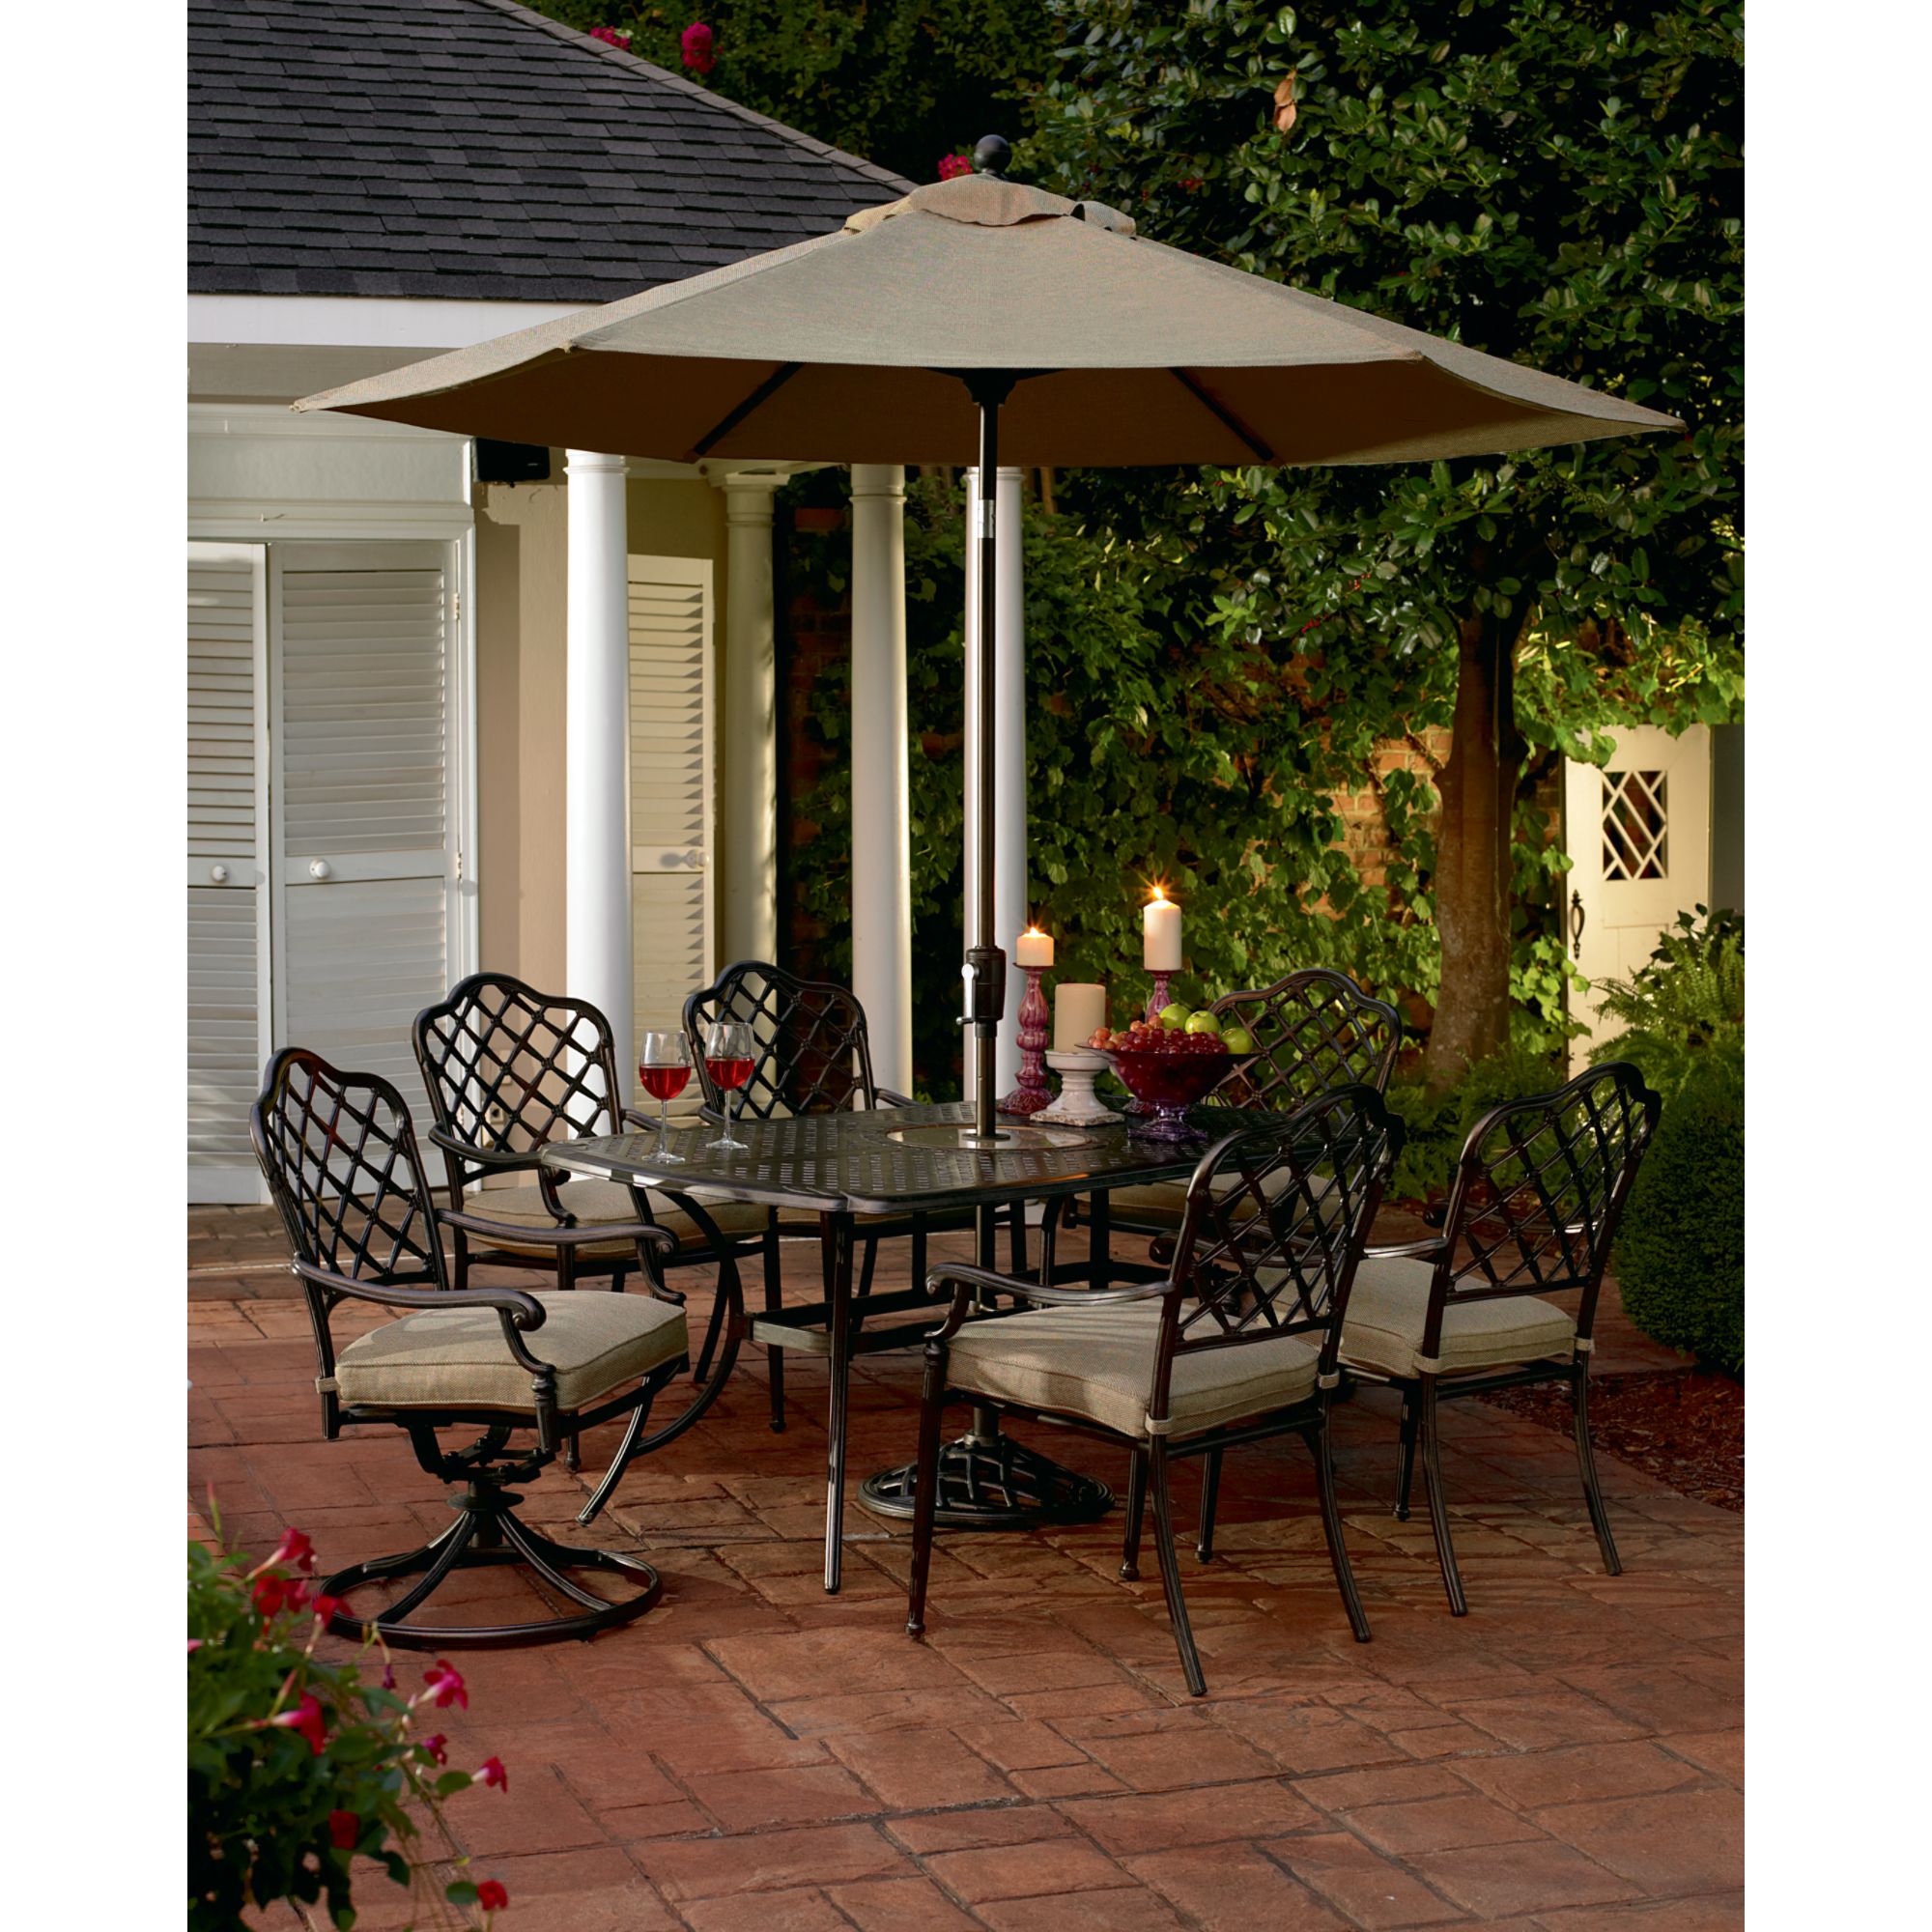 Shop for clearance in Patio Furniture at Kmart.com including Patio ...